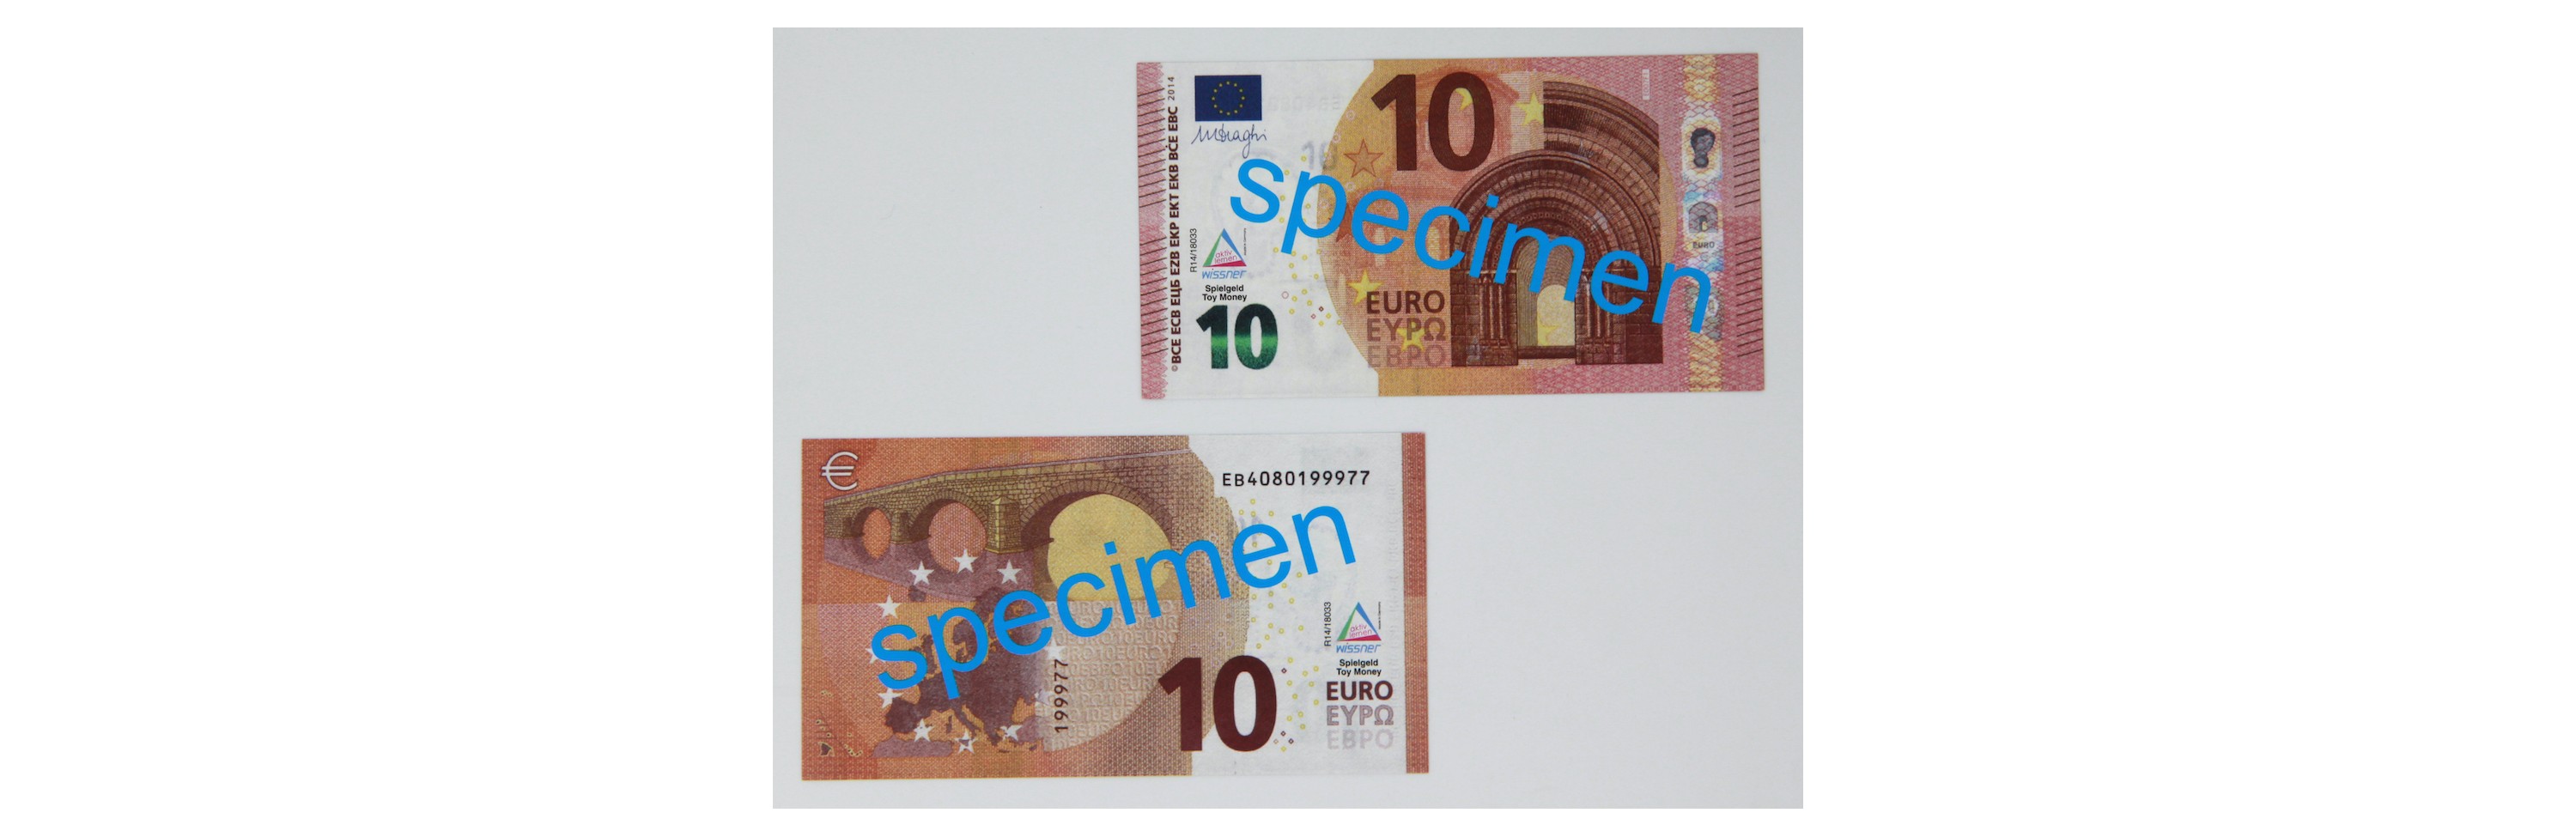 Wissner® active learning - 10 Euro - notes (100 pcs)